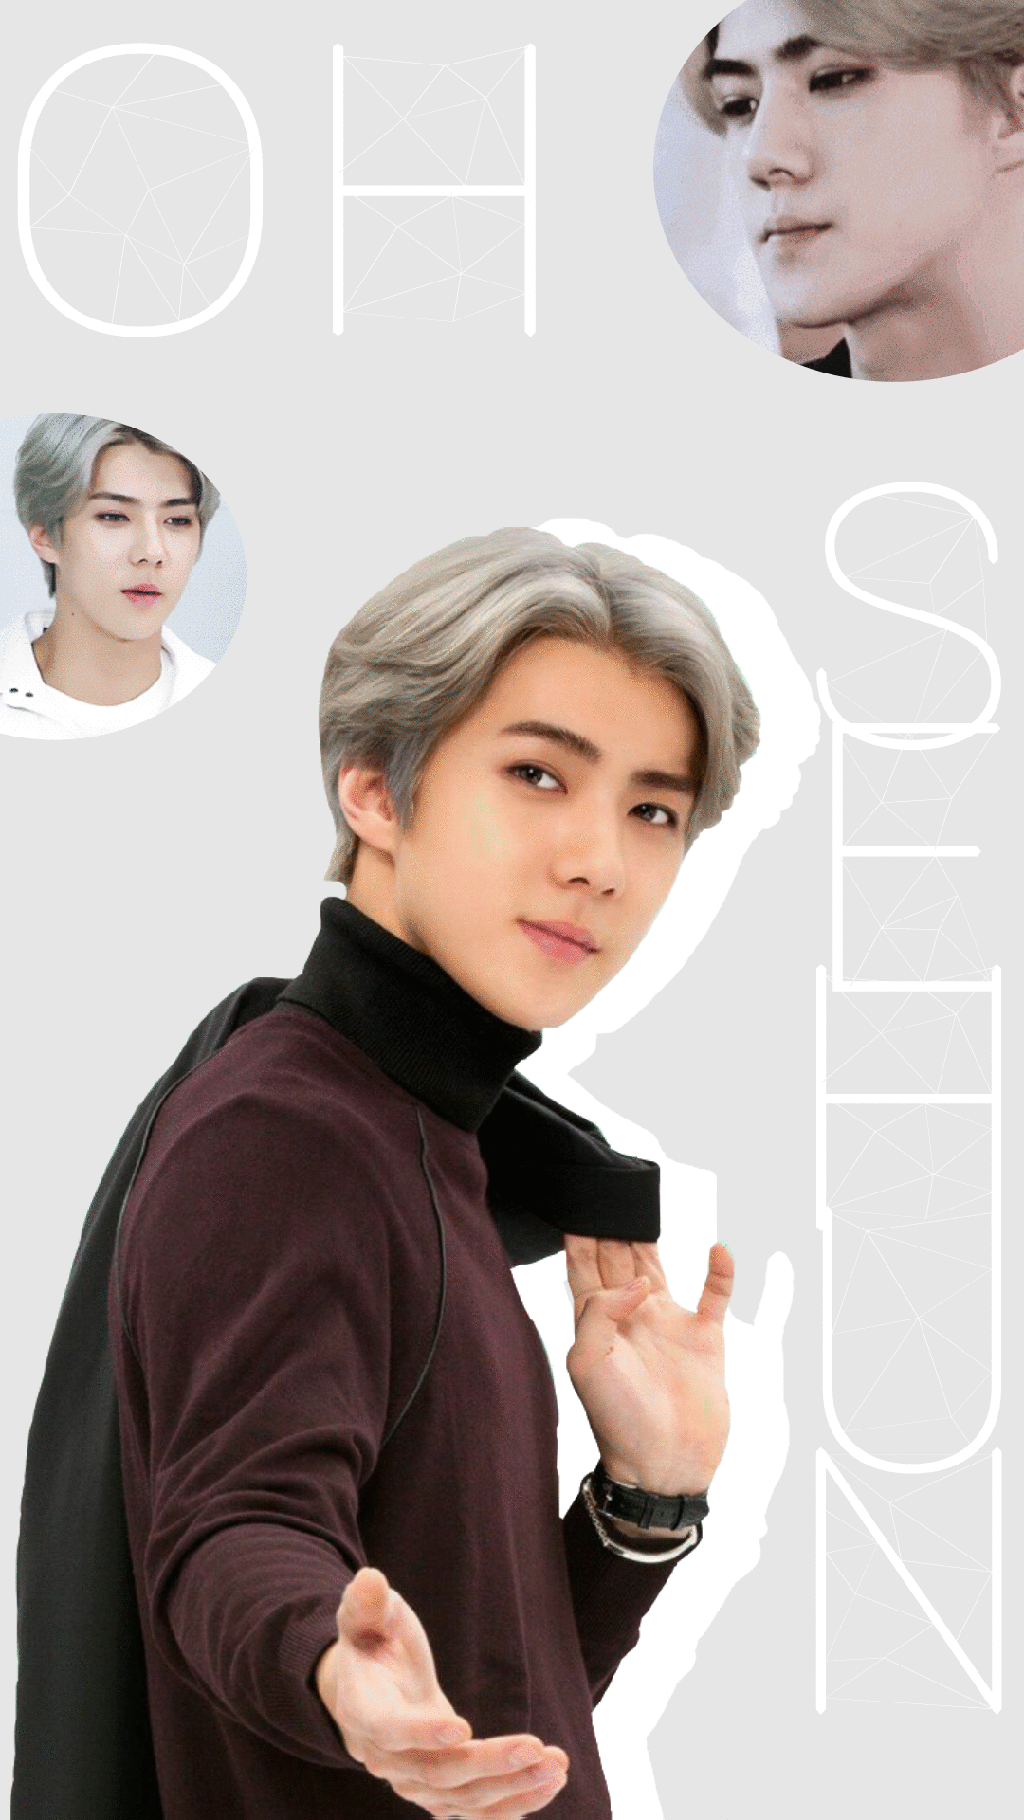 exo sehun wallpaper for android